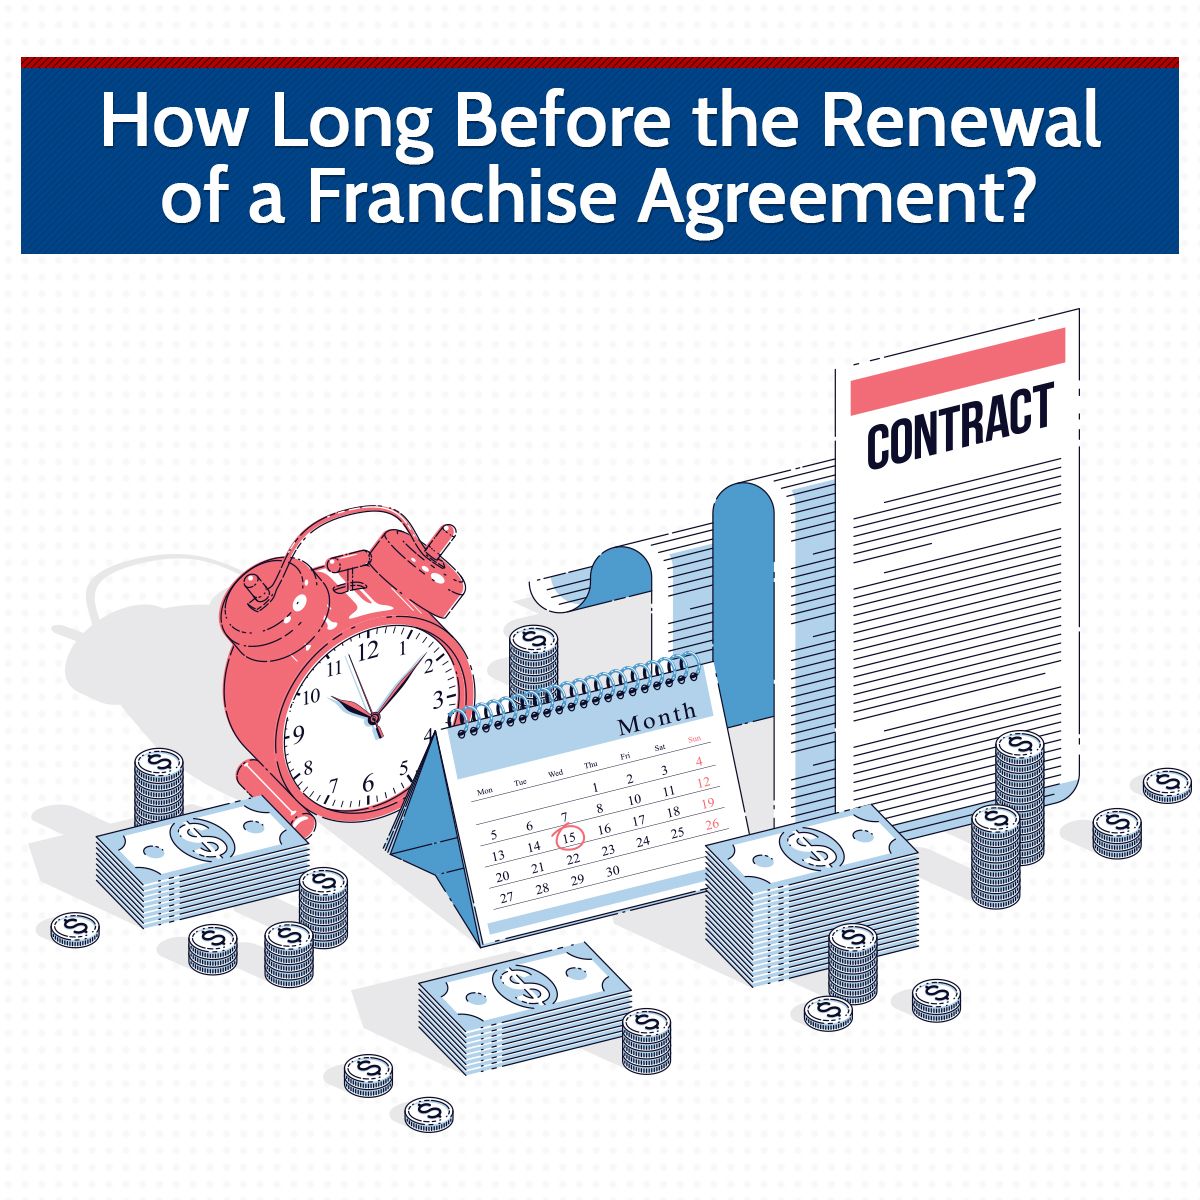 How Long Before the Renewal of a Franchise Agreement?